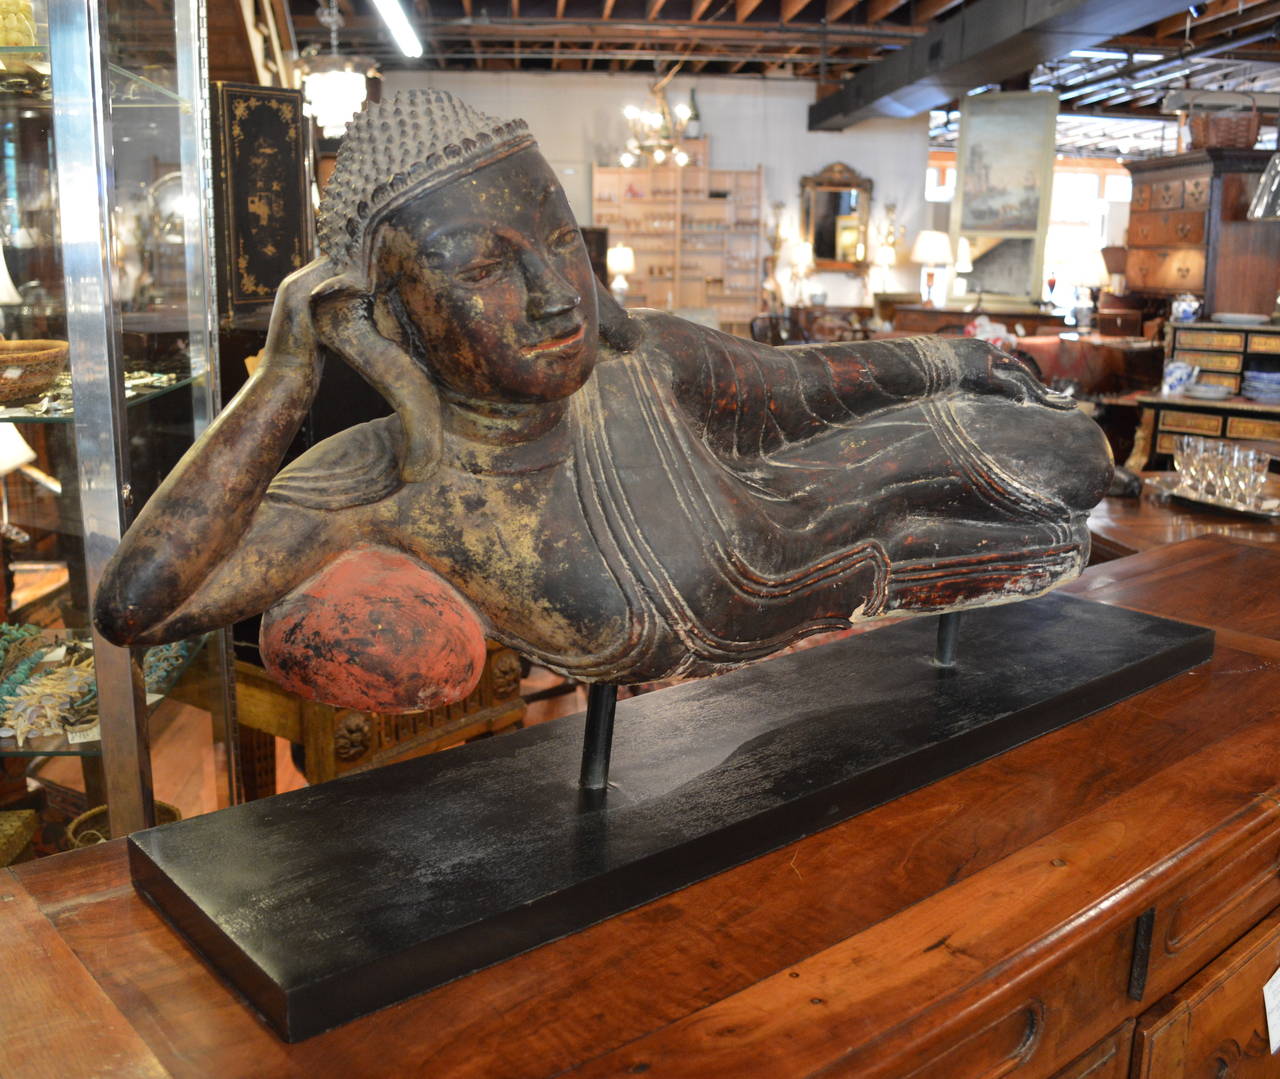 Antique, carved polychrome and gilt Buddha, reclining, mounted on later Stand, 19th century, possibly earlier.